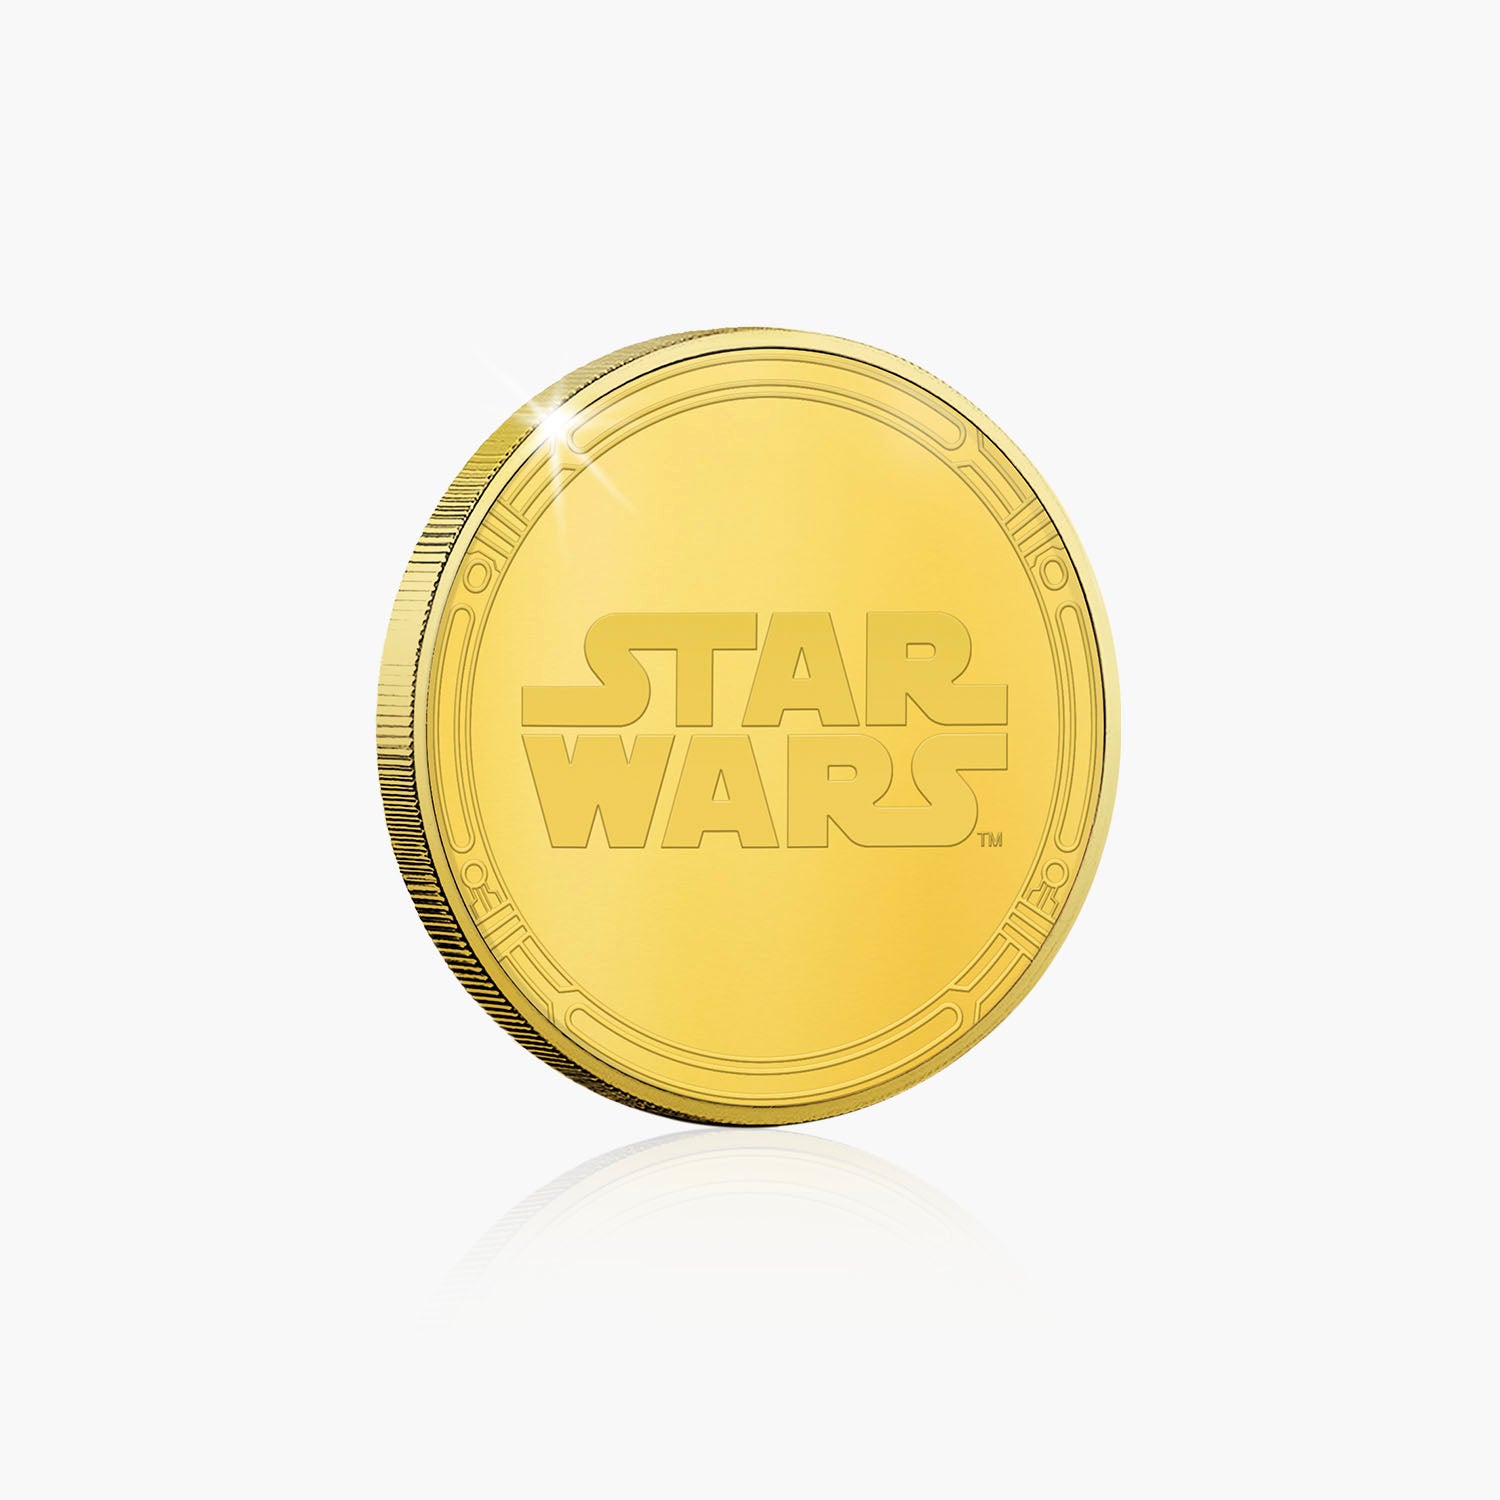 The Rise of Skywalker Gold Plated Commemorative